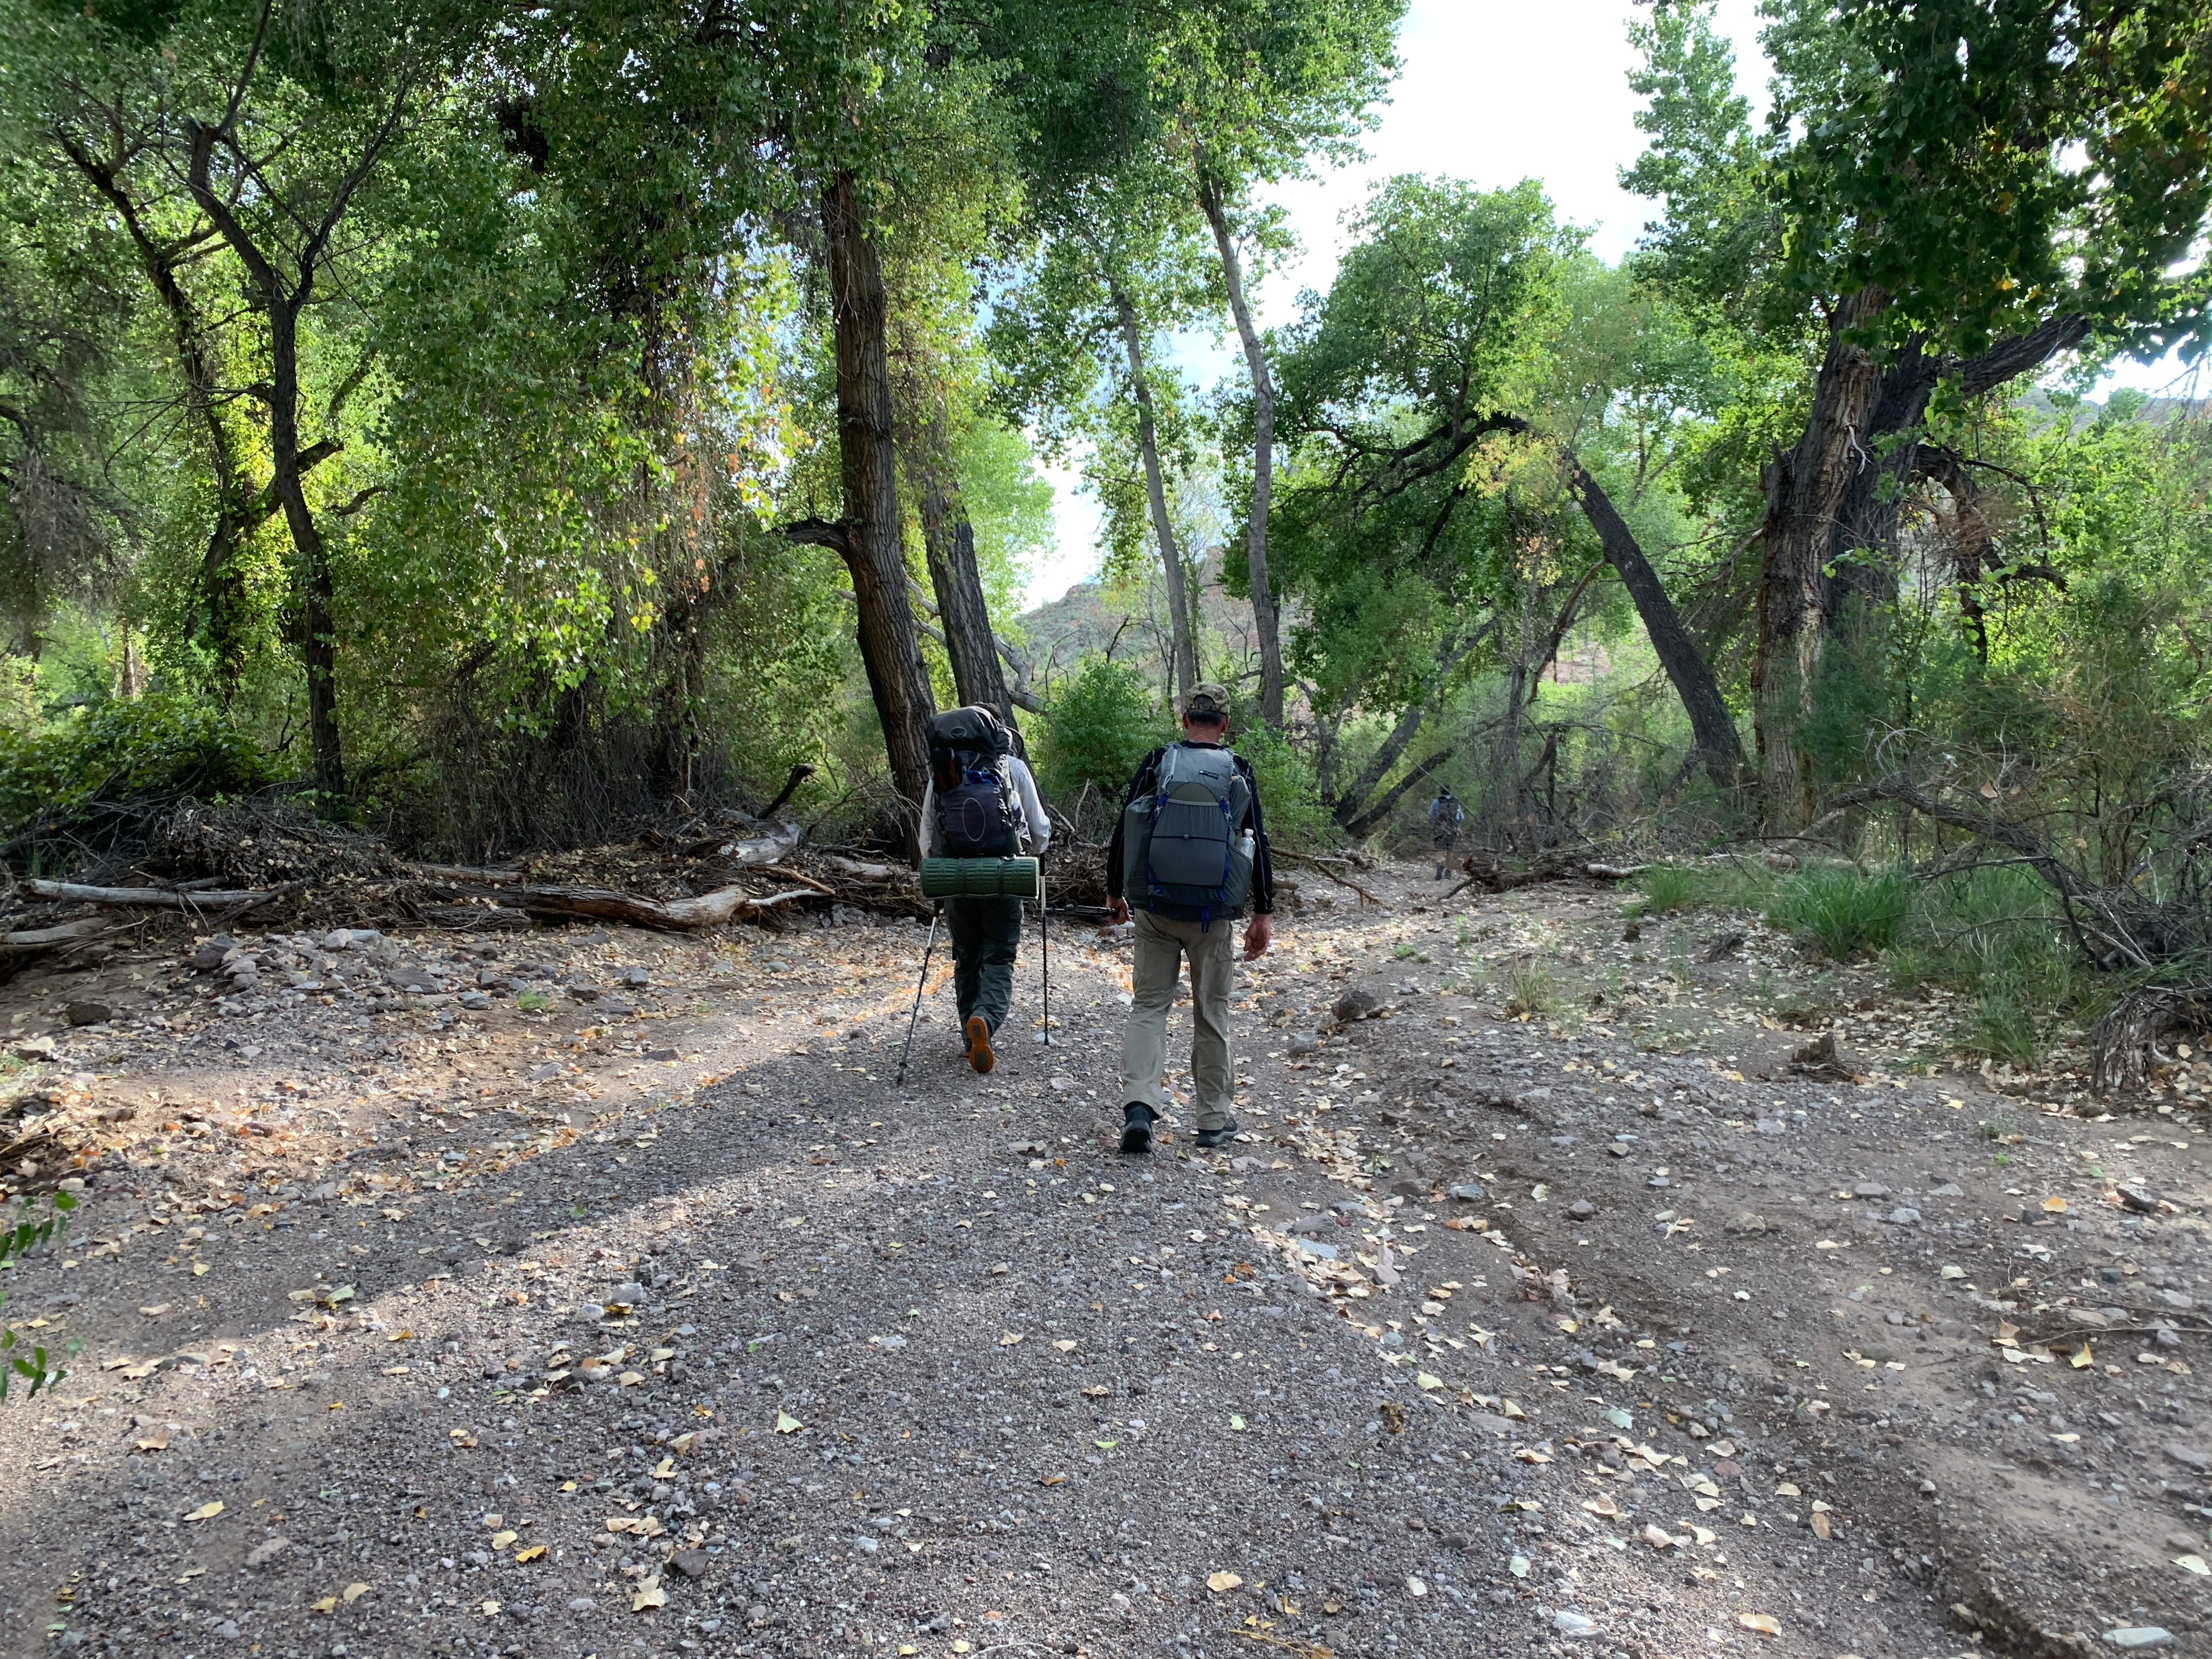 Hiking amongst the cottonwood forest grove